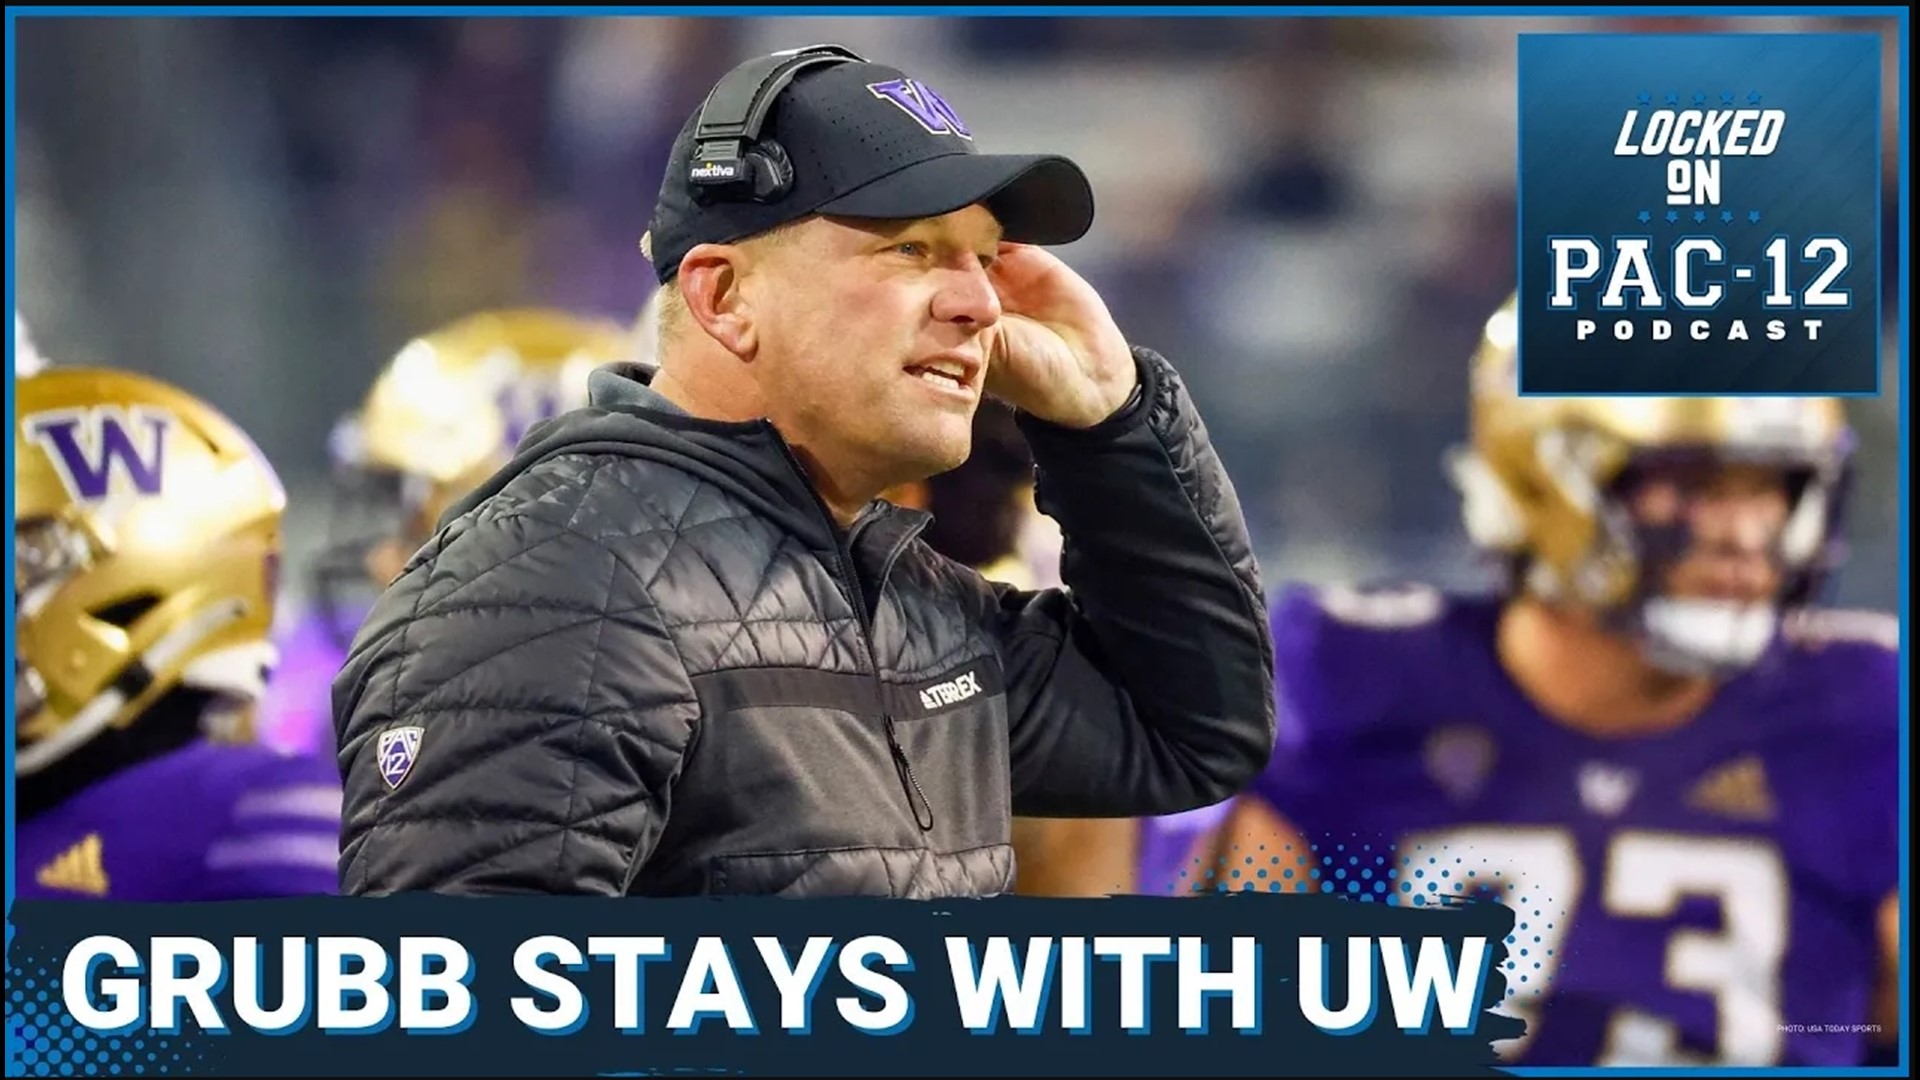 Washington's offensive coordinator Ryan Grubb, who got a raise up to $2 million this offseason, is making a smart move staying at Washington.